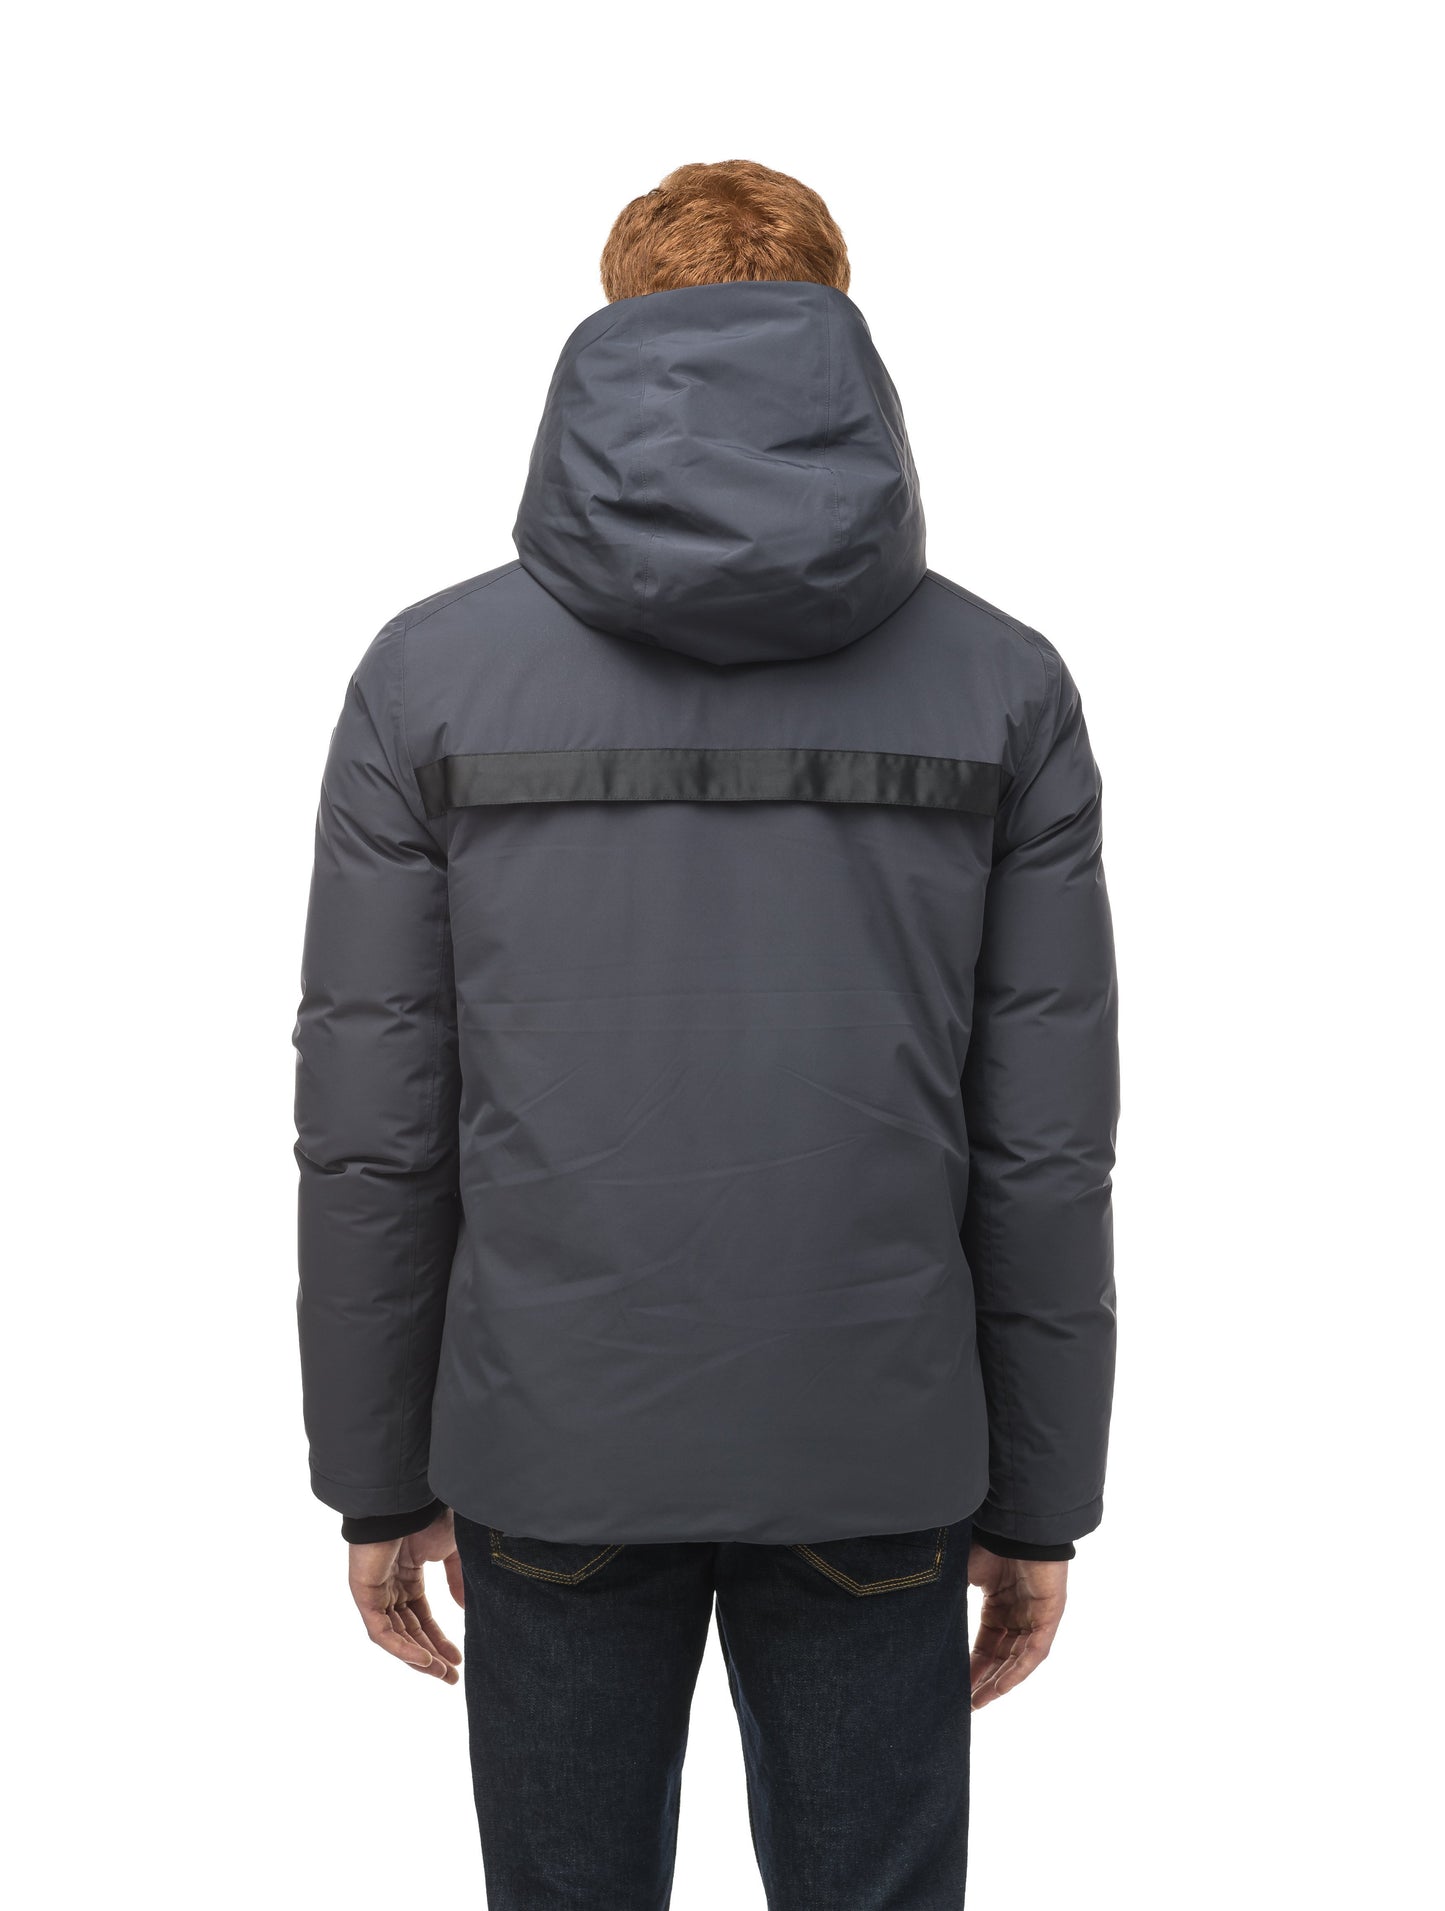 Hip length, reversible men's down filled jacket with removable hood in Marine